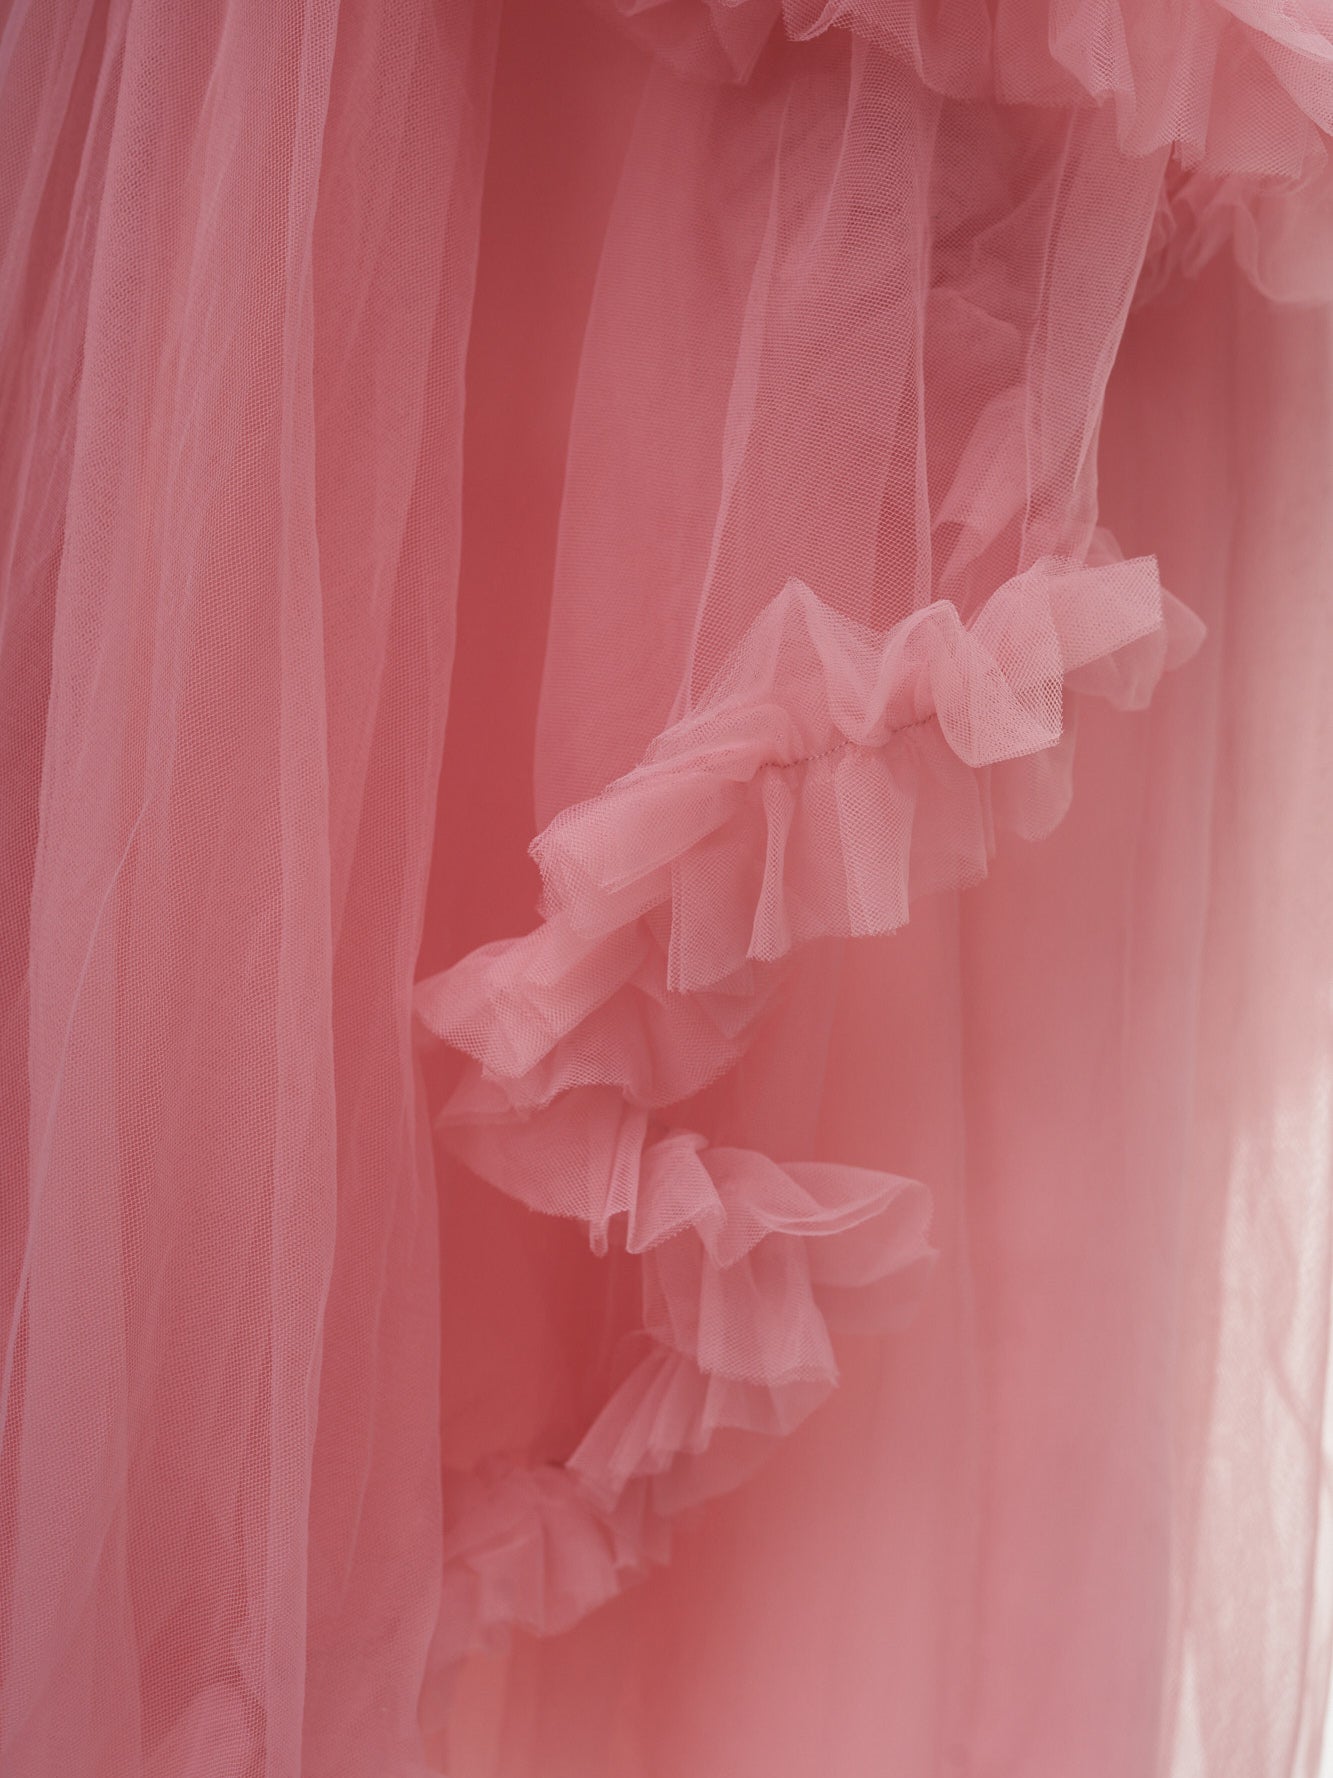 Kate Pink Sequin Tulle Princess Kids Dress for Photography